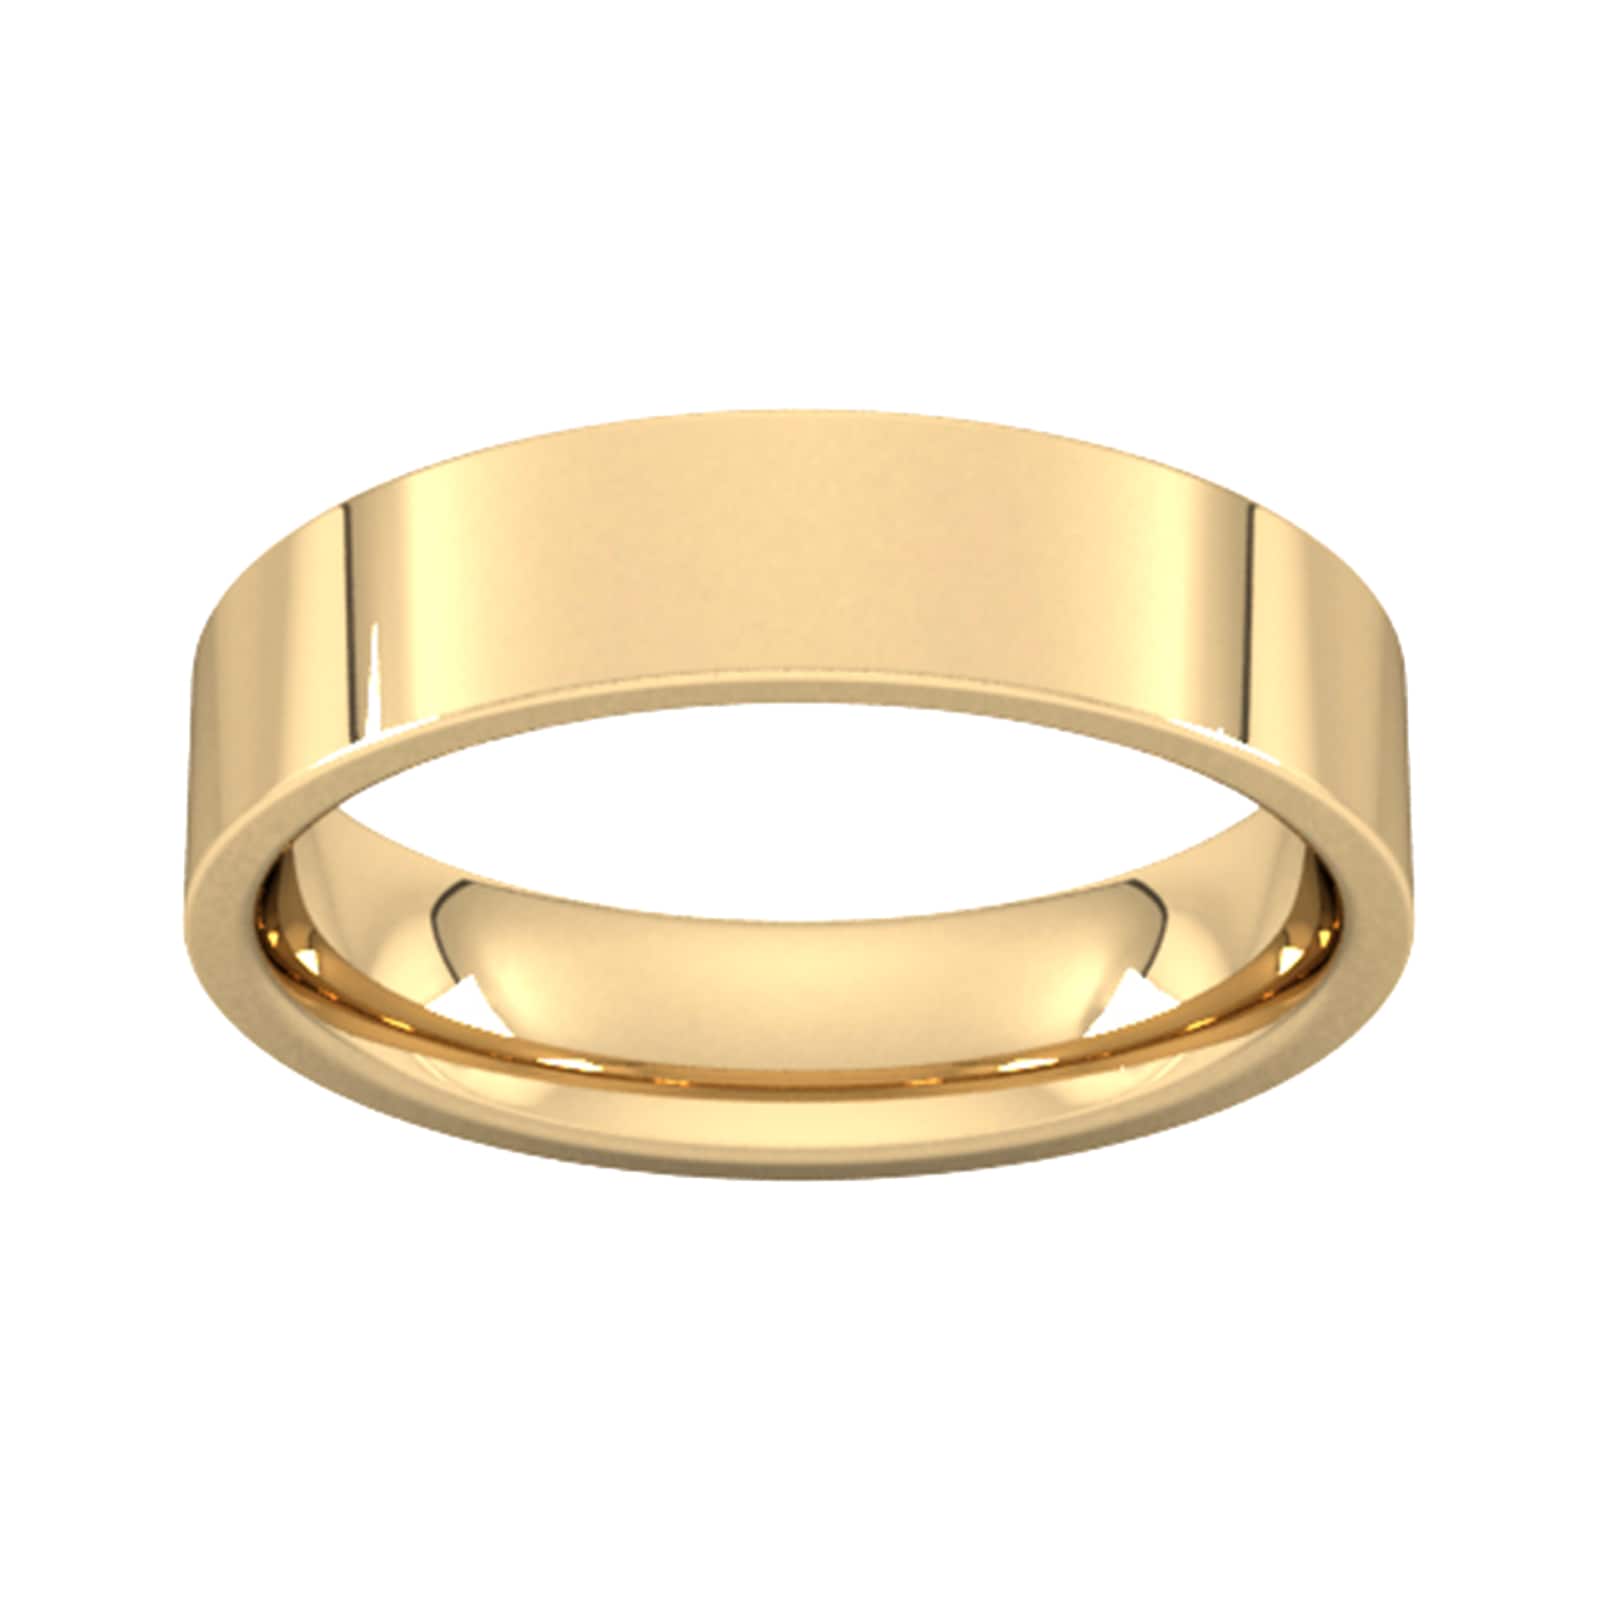 5mm Flat Court Heavy Wedding Ring In 9 Carat Yellow Gold - Ring Size N